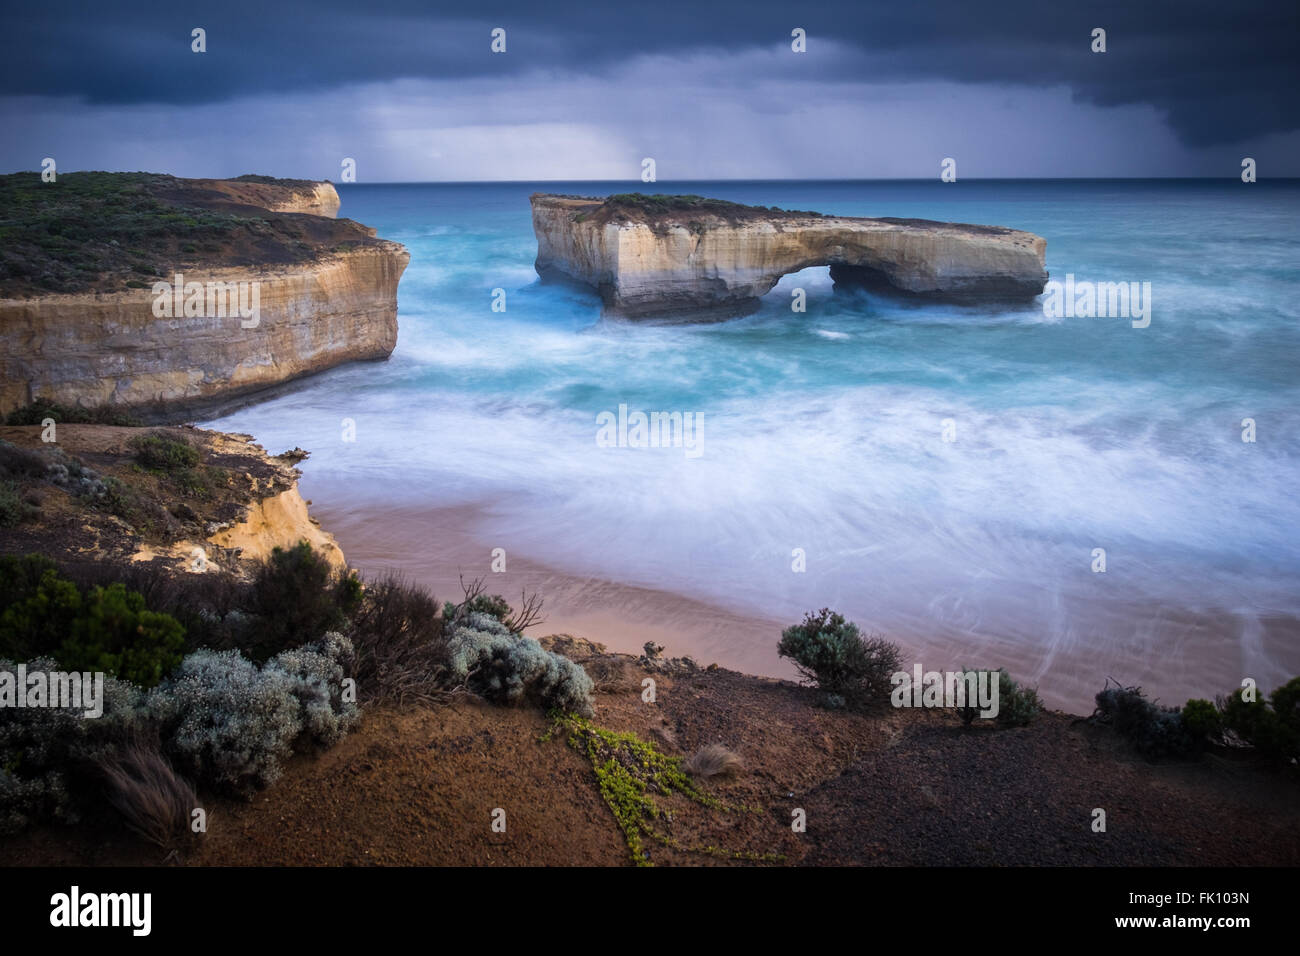 Rain showers pass the scenic natural arch formation, London Bridge (Arch), near Port Campbell along Victoria's Great Ocean Road. The arch was once connected to the mainland by a rock bridge, which unexpectedly collapsed on 15th January 1990, leaving two people stranded on the outer stack, who were later rescued by helicopter. Stock Photo